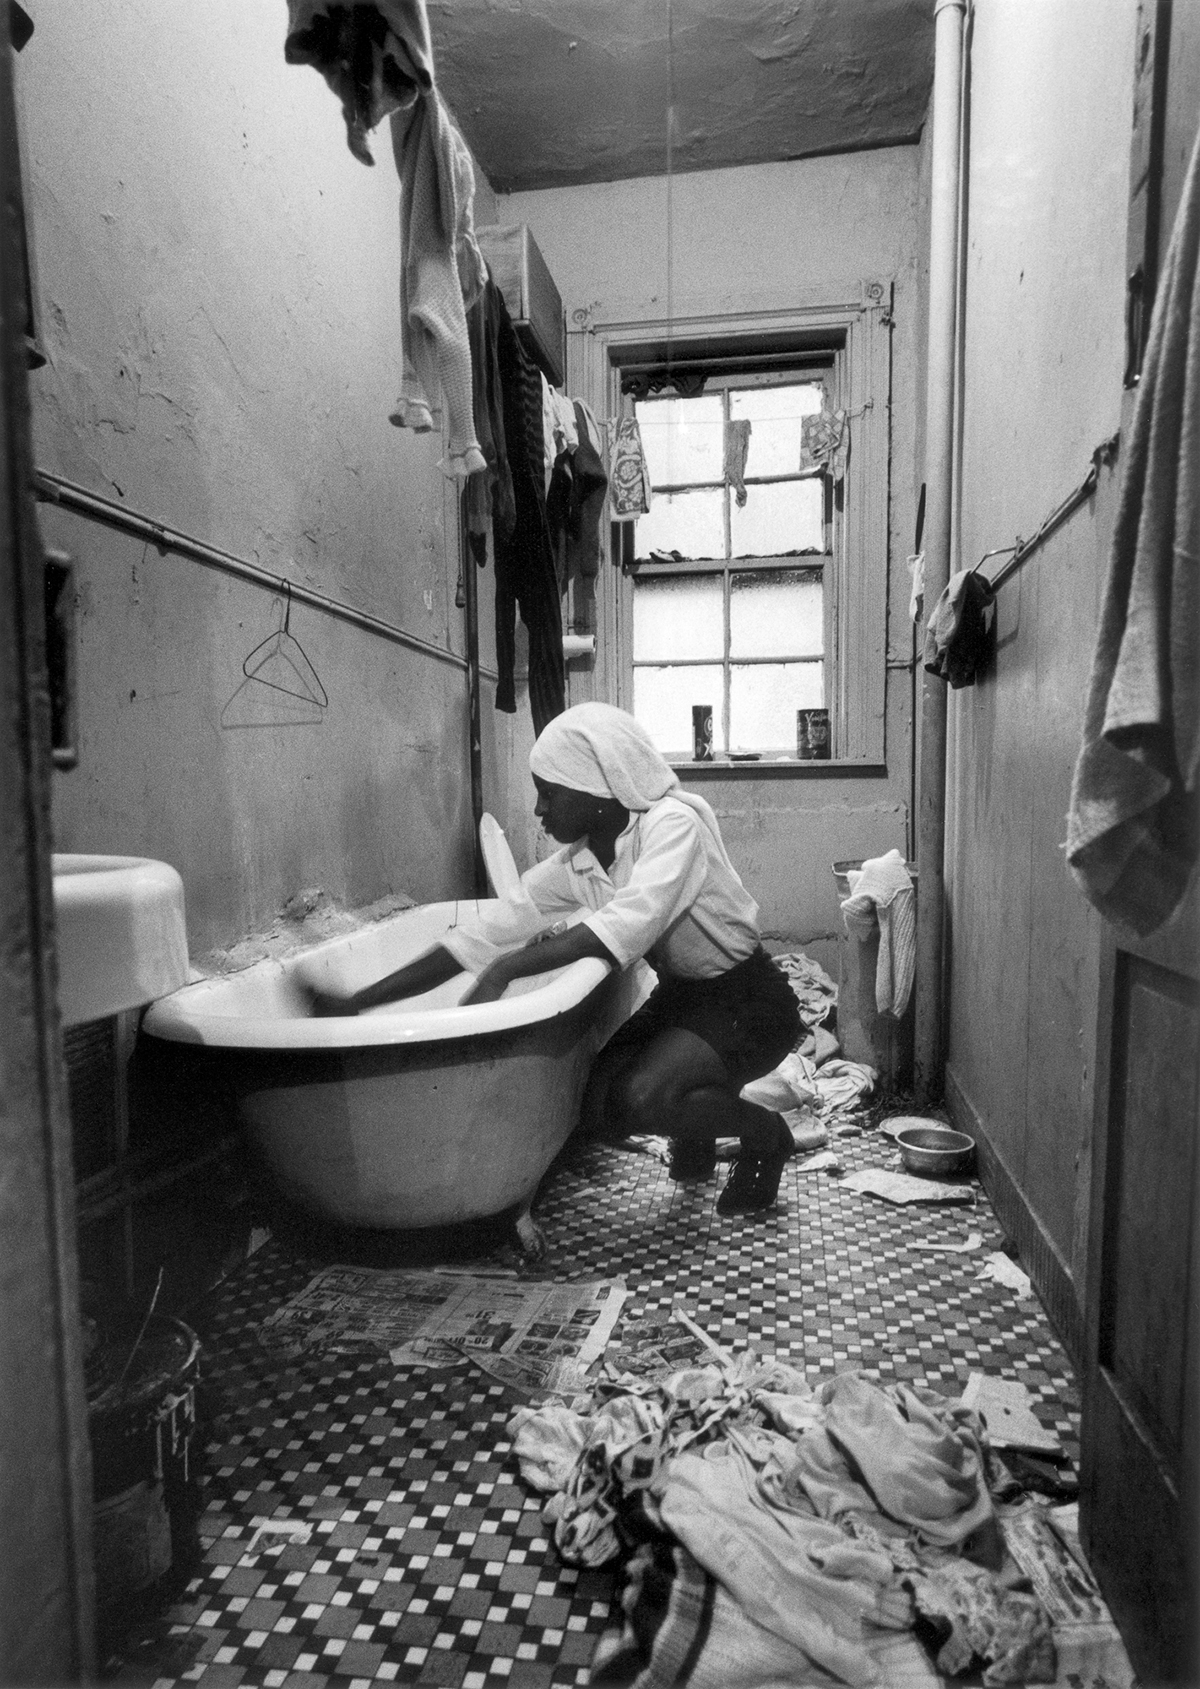     Gordon Parks, Rosie Fontenelle Cleans the Bathtub, New York, 1967. Gelatin silver print, 35.6 x 27.9cm. Courtesy of the Gordon Parks Foundation and Nicholas Metivier Gallery. © the Parks Foundation.

